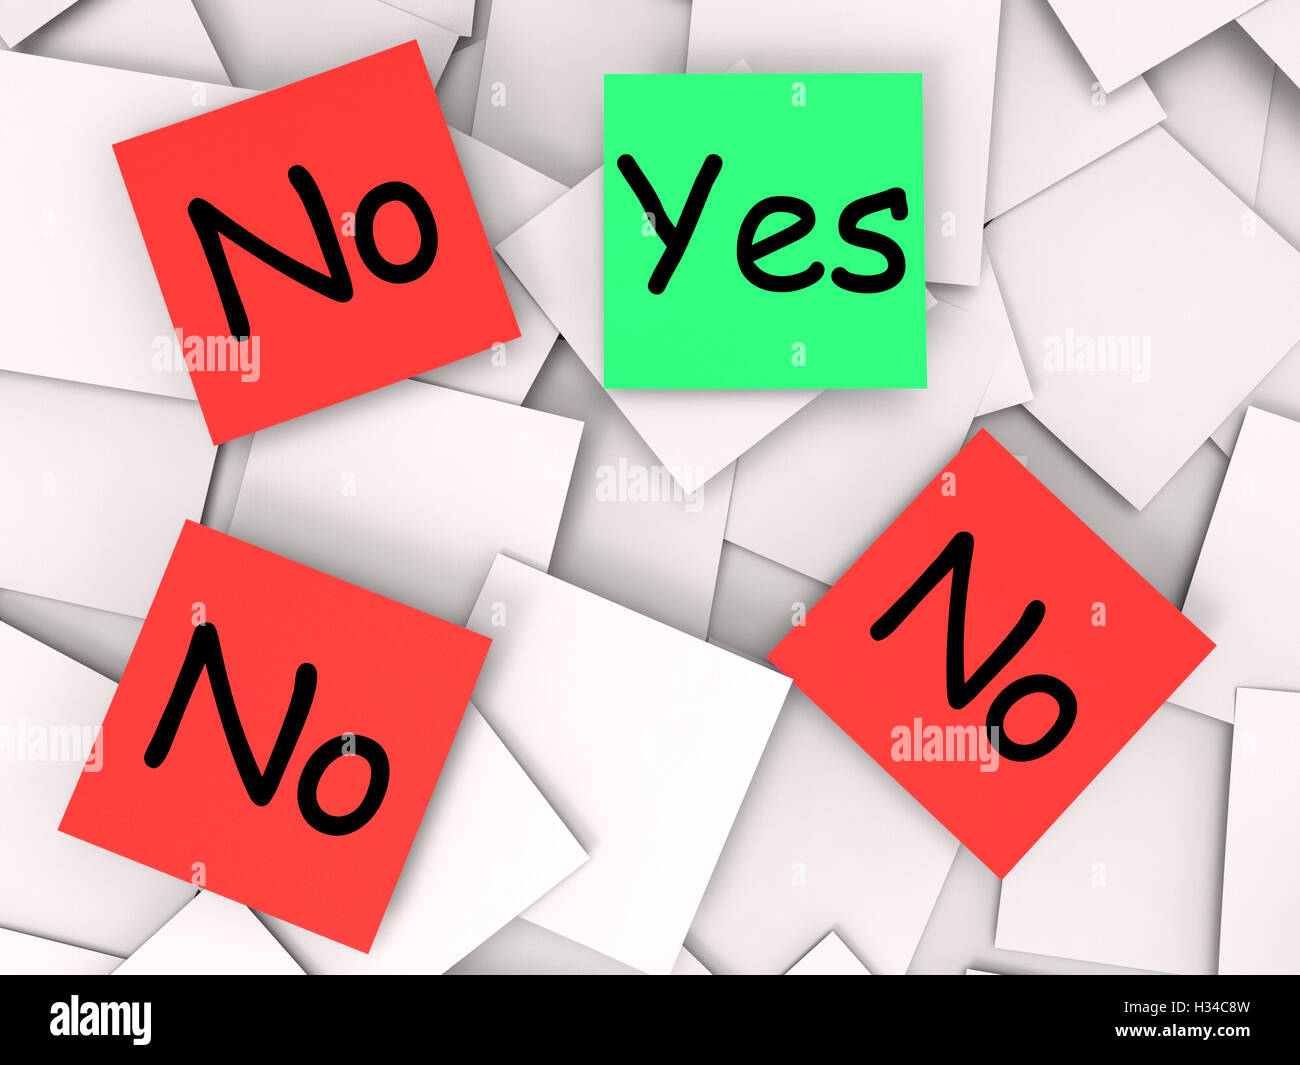 Yes No Post-It Notes Mean Positive Or Negative Response Stock Photo